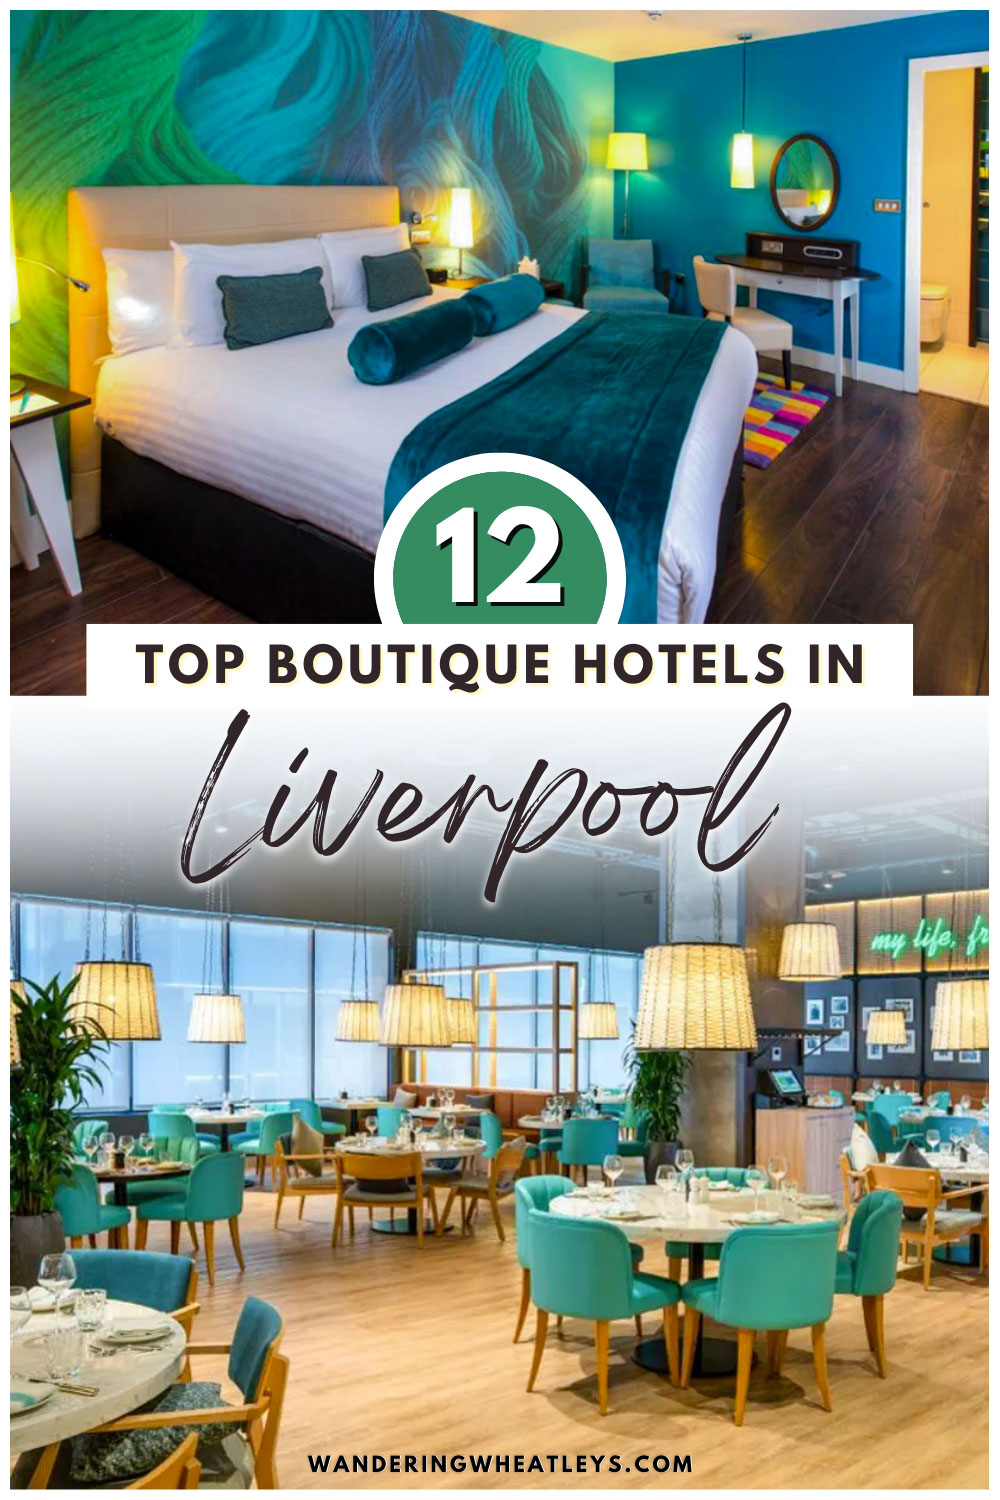 The Best Boutique Hotels in Liverpool